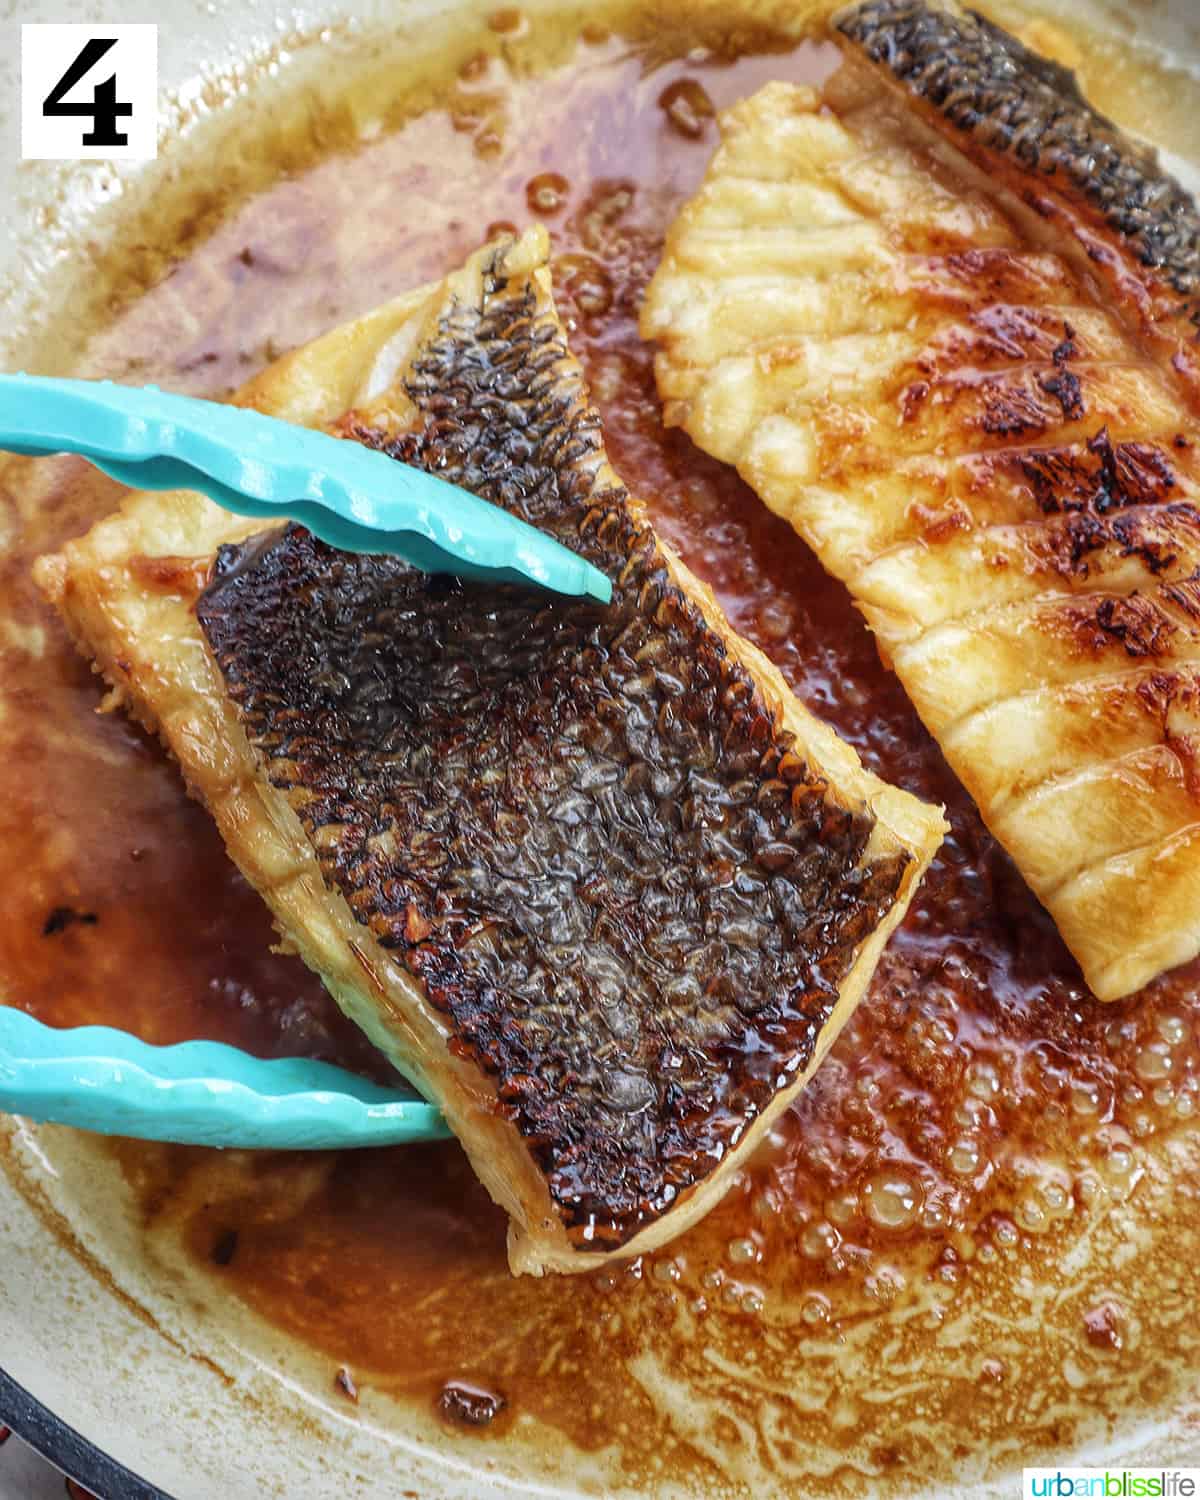 blue tongs flipping over a sea bass fillet next to another fillet in a pan cooking.